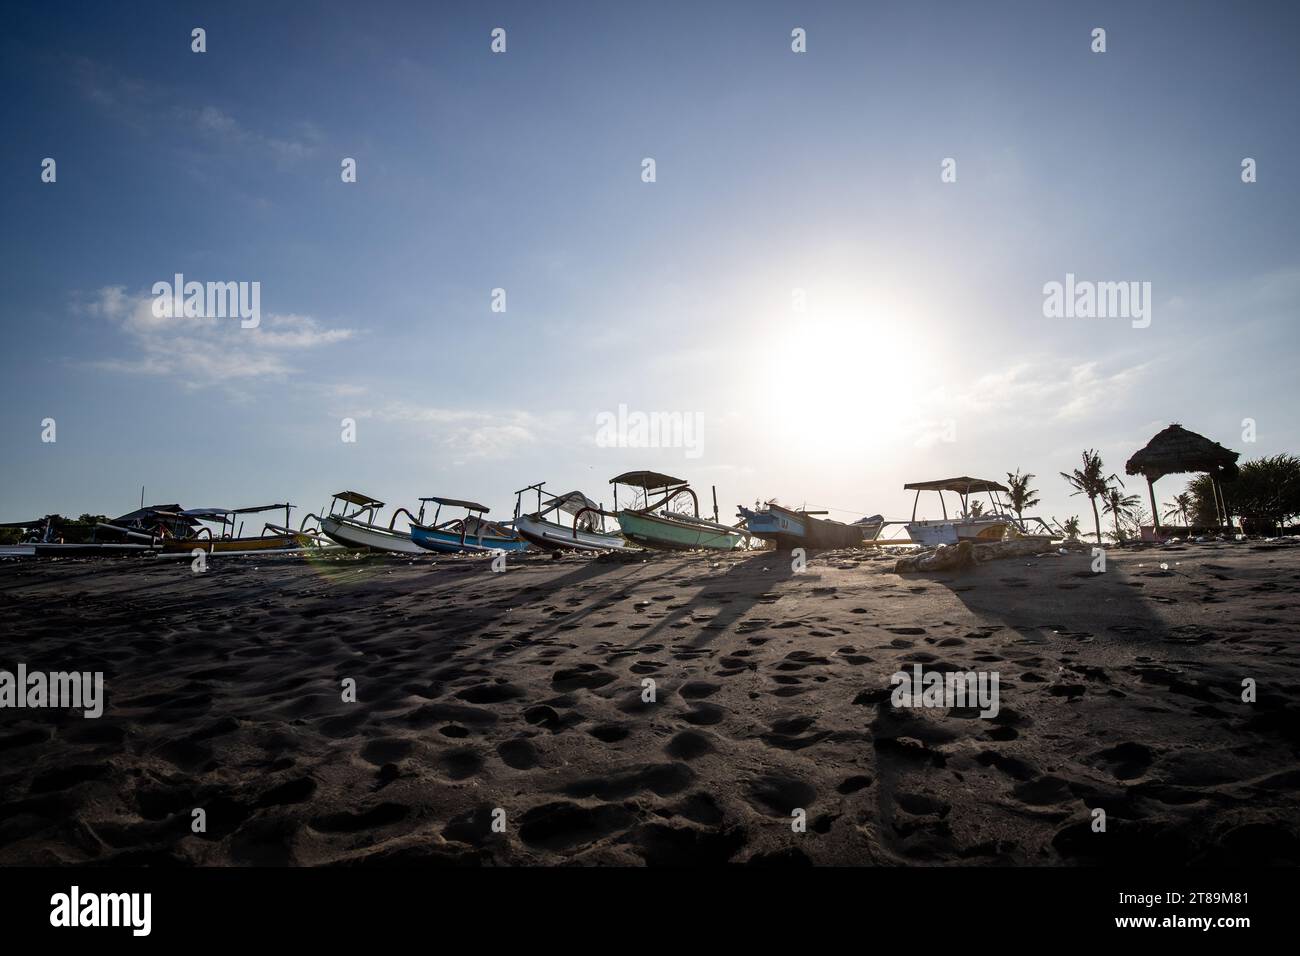 Black sand beach in Bali, natural with temples, boats (jukung) and waves at sunrise. Tropical environment in Indonesia in the morning Stock Photo